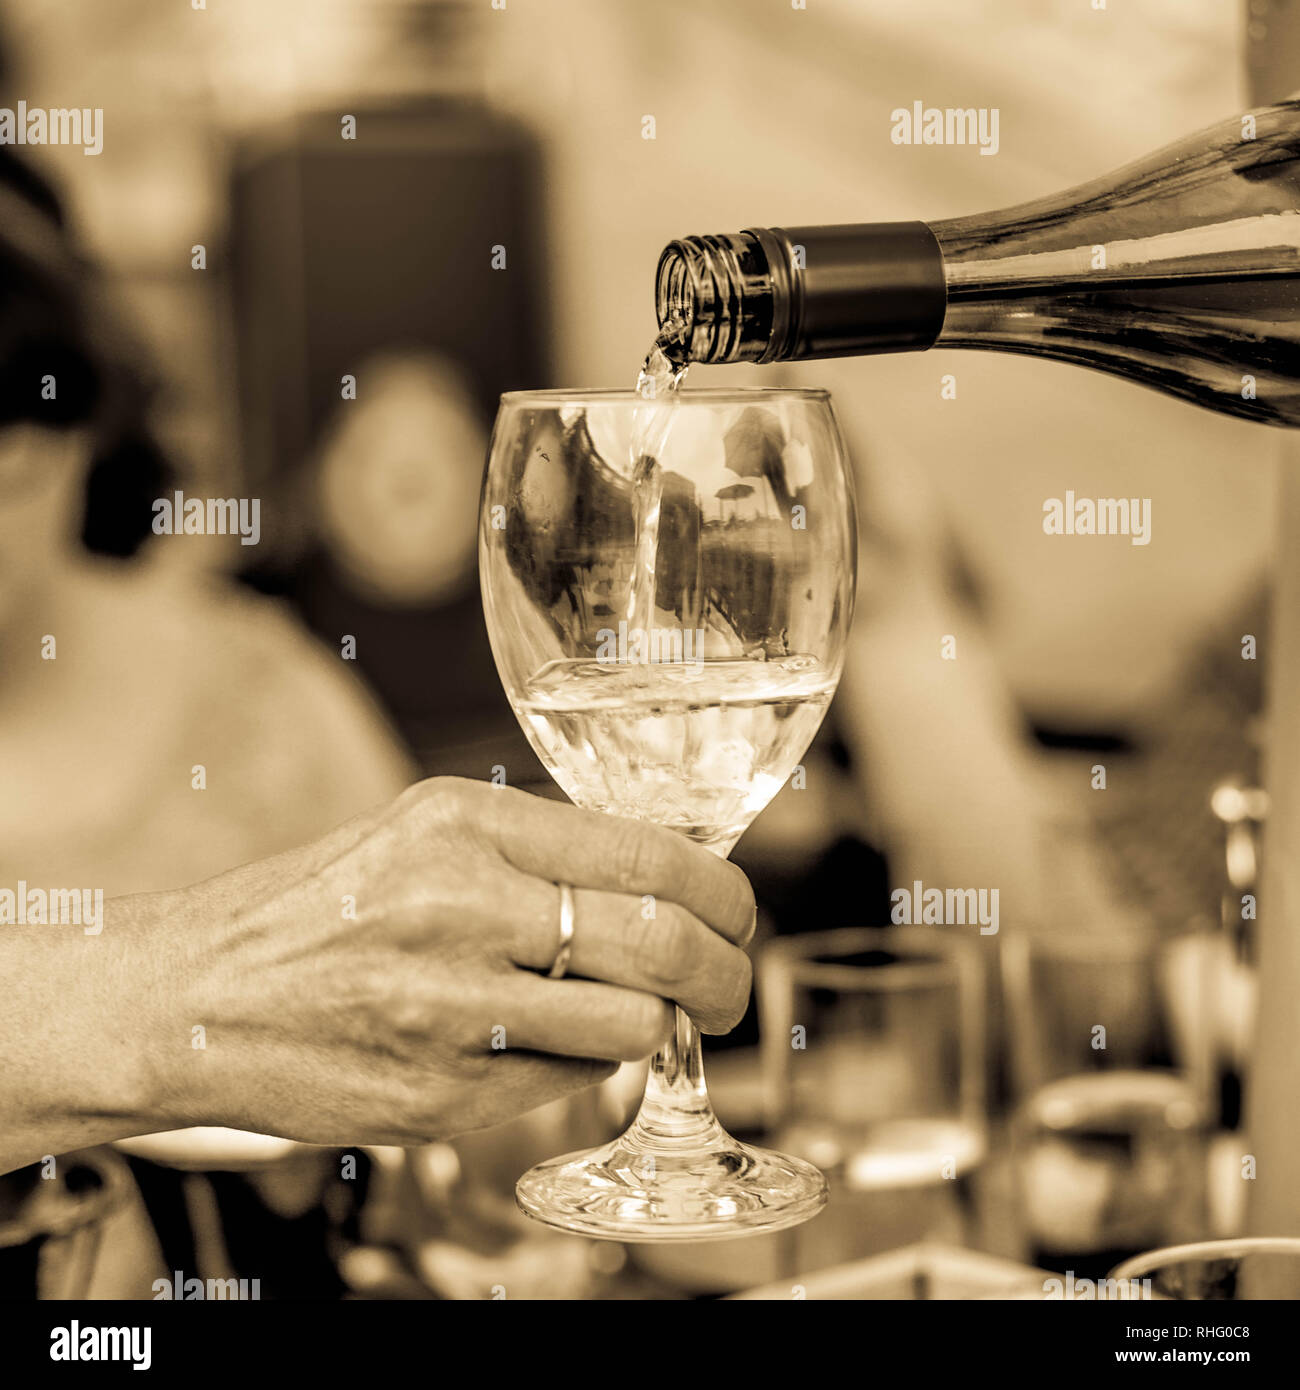 https://c8.alamy.com/comp/RHG0C8/toned-close-up-monochrome-image-of-pouring-wine-from-a-bottle-into-a-glass-RHG0C8.jpg